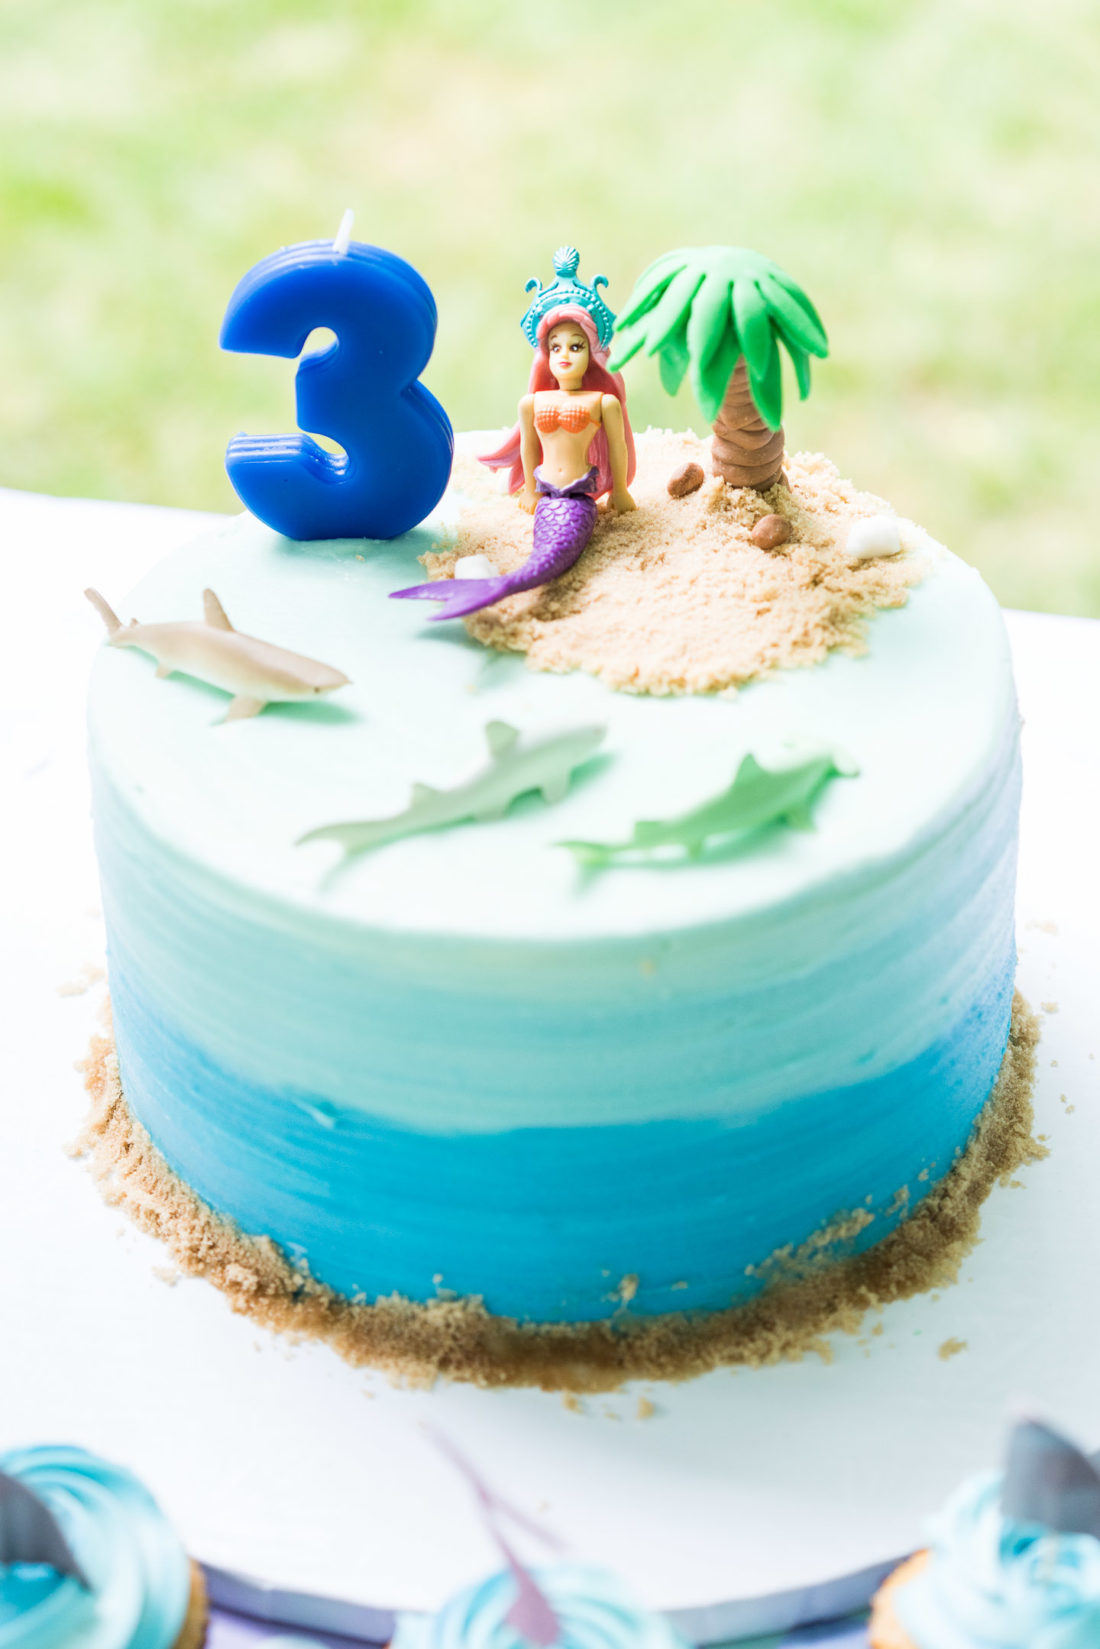 Marlowe Martino's Mermaid and Shark themed birthday cake sits on a table surrounded by cupcakes